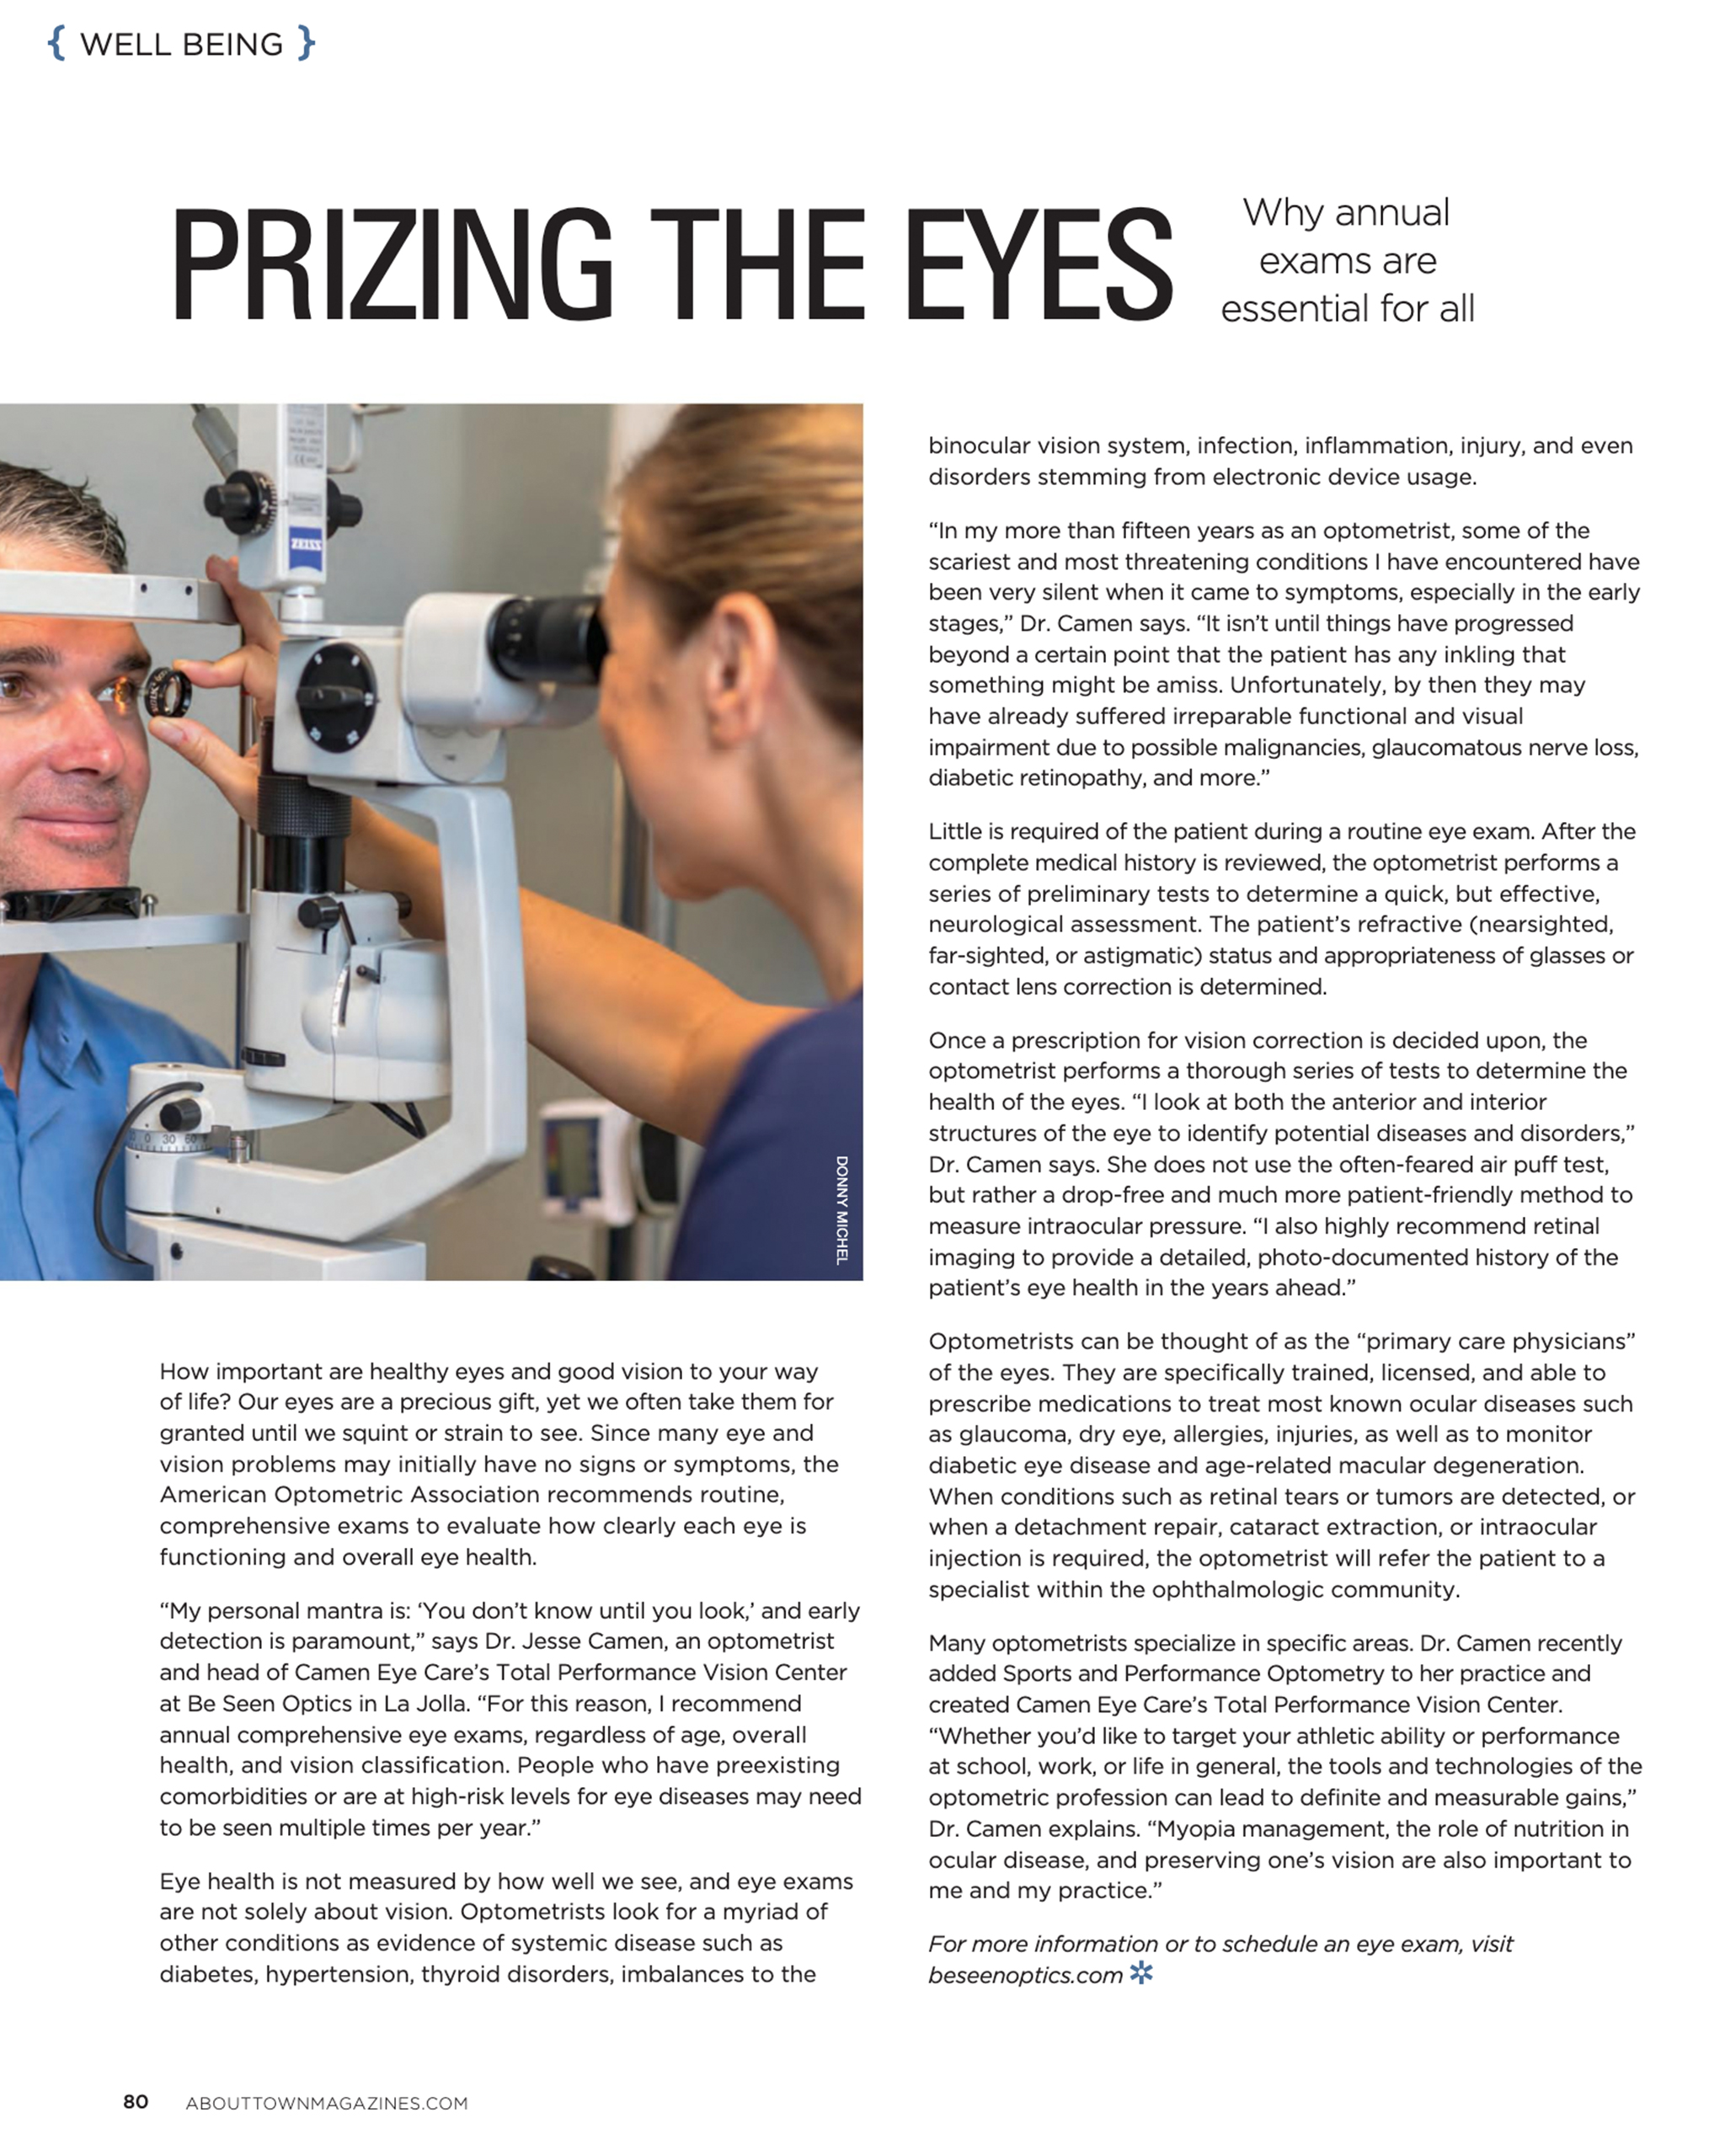 Camen Eye Care About Town Magazine